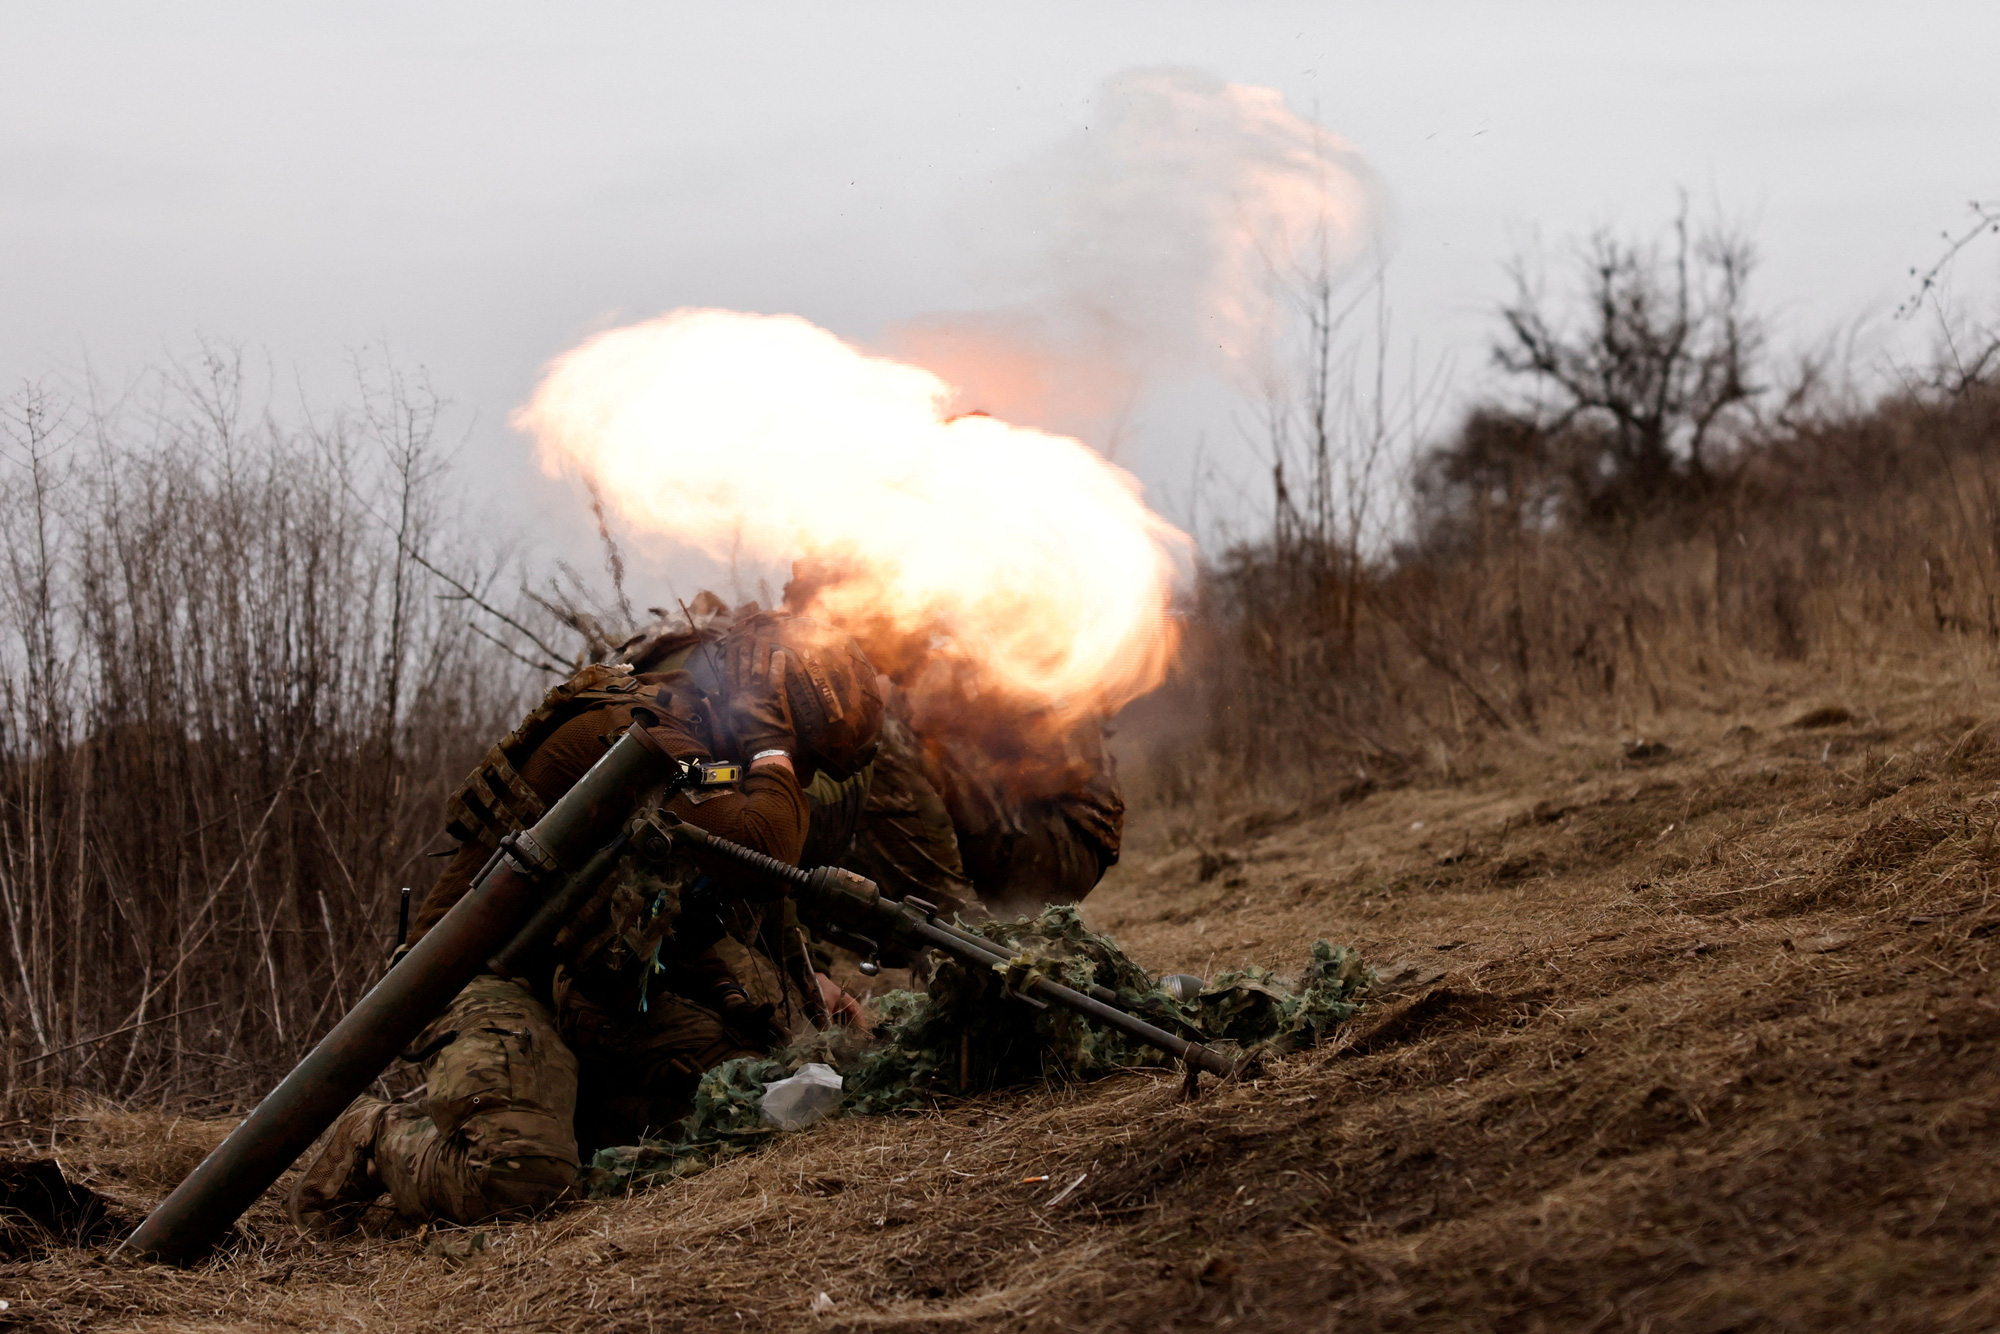 Ukrainian soldiers at a frontline position near the city of Bakhmut, Donetsk, March 16 - Photo: REUTERS